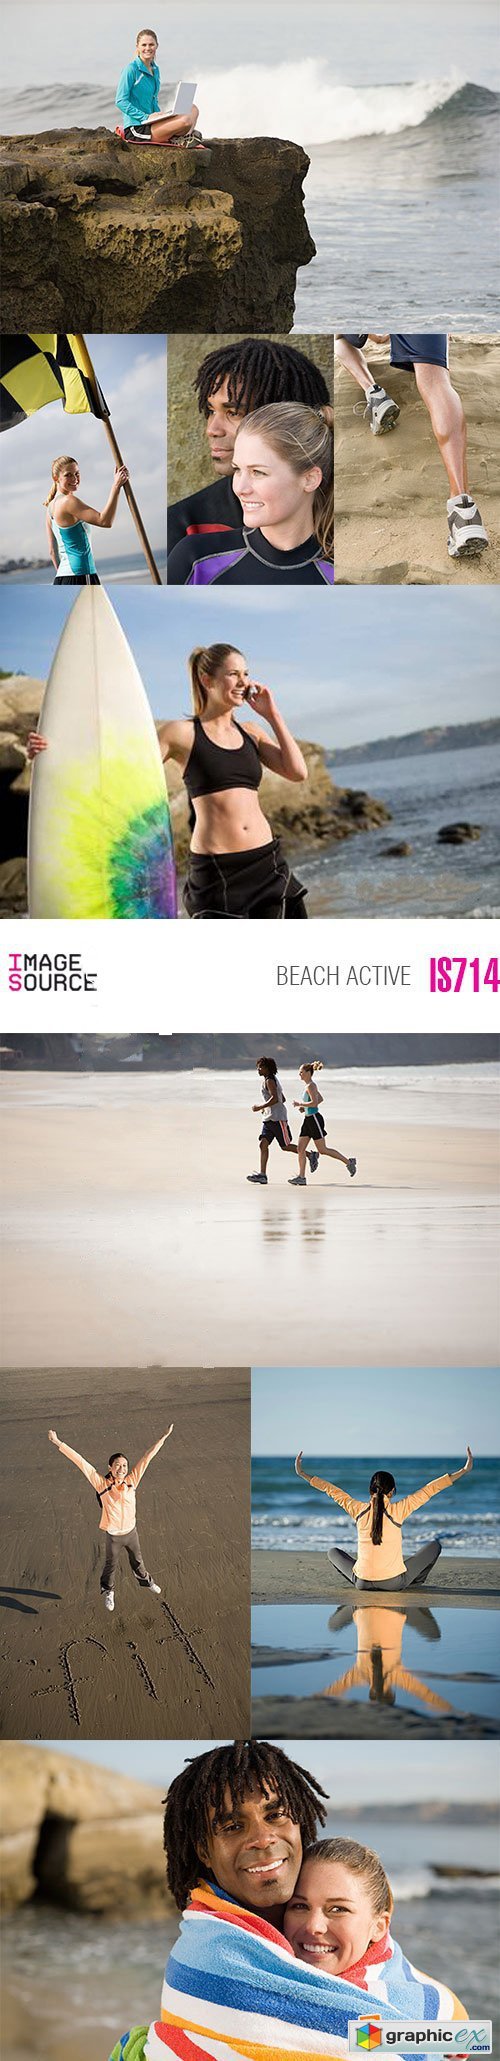 Image Source IS714 Beach Active